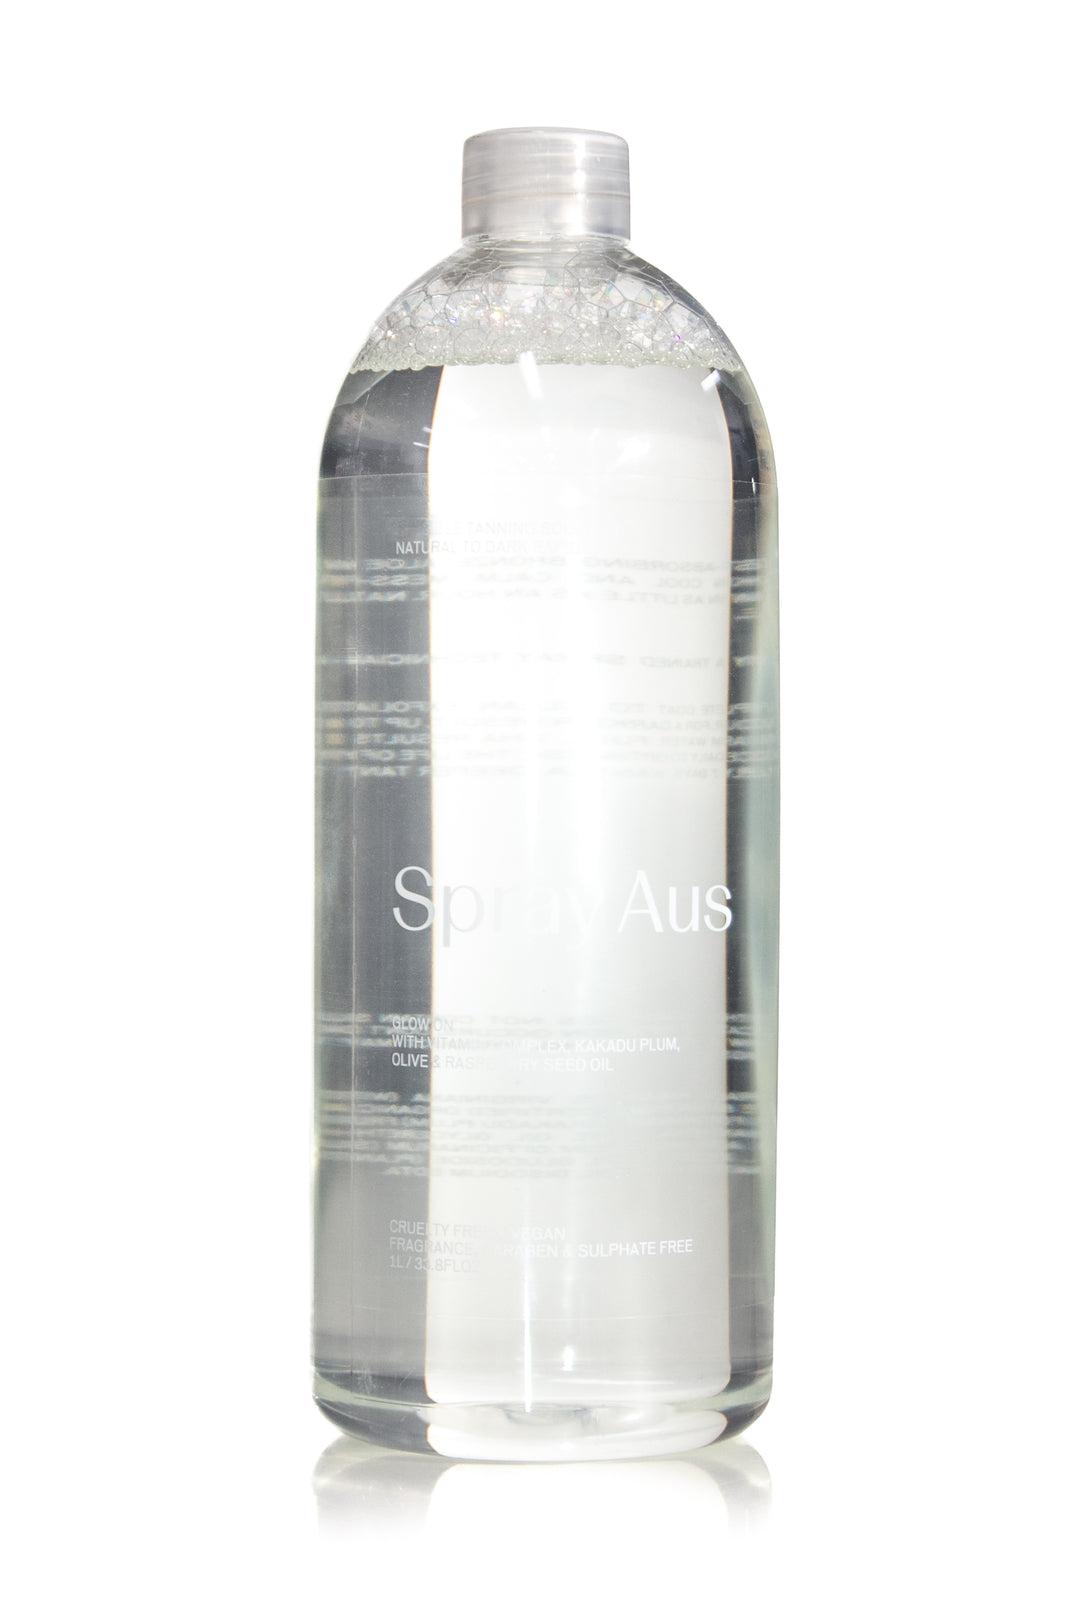 SPRAY AUS PROFESSIONAL TANNING SOLUTION CLEAR TAN 1L